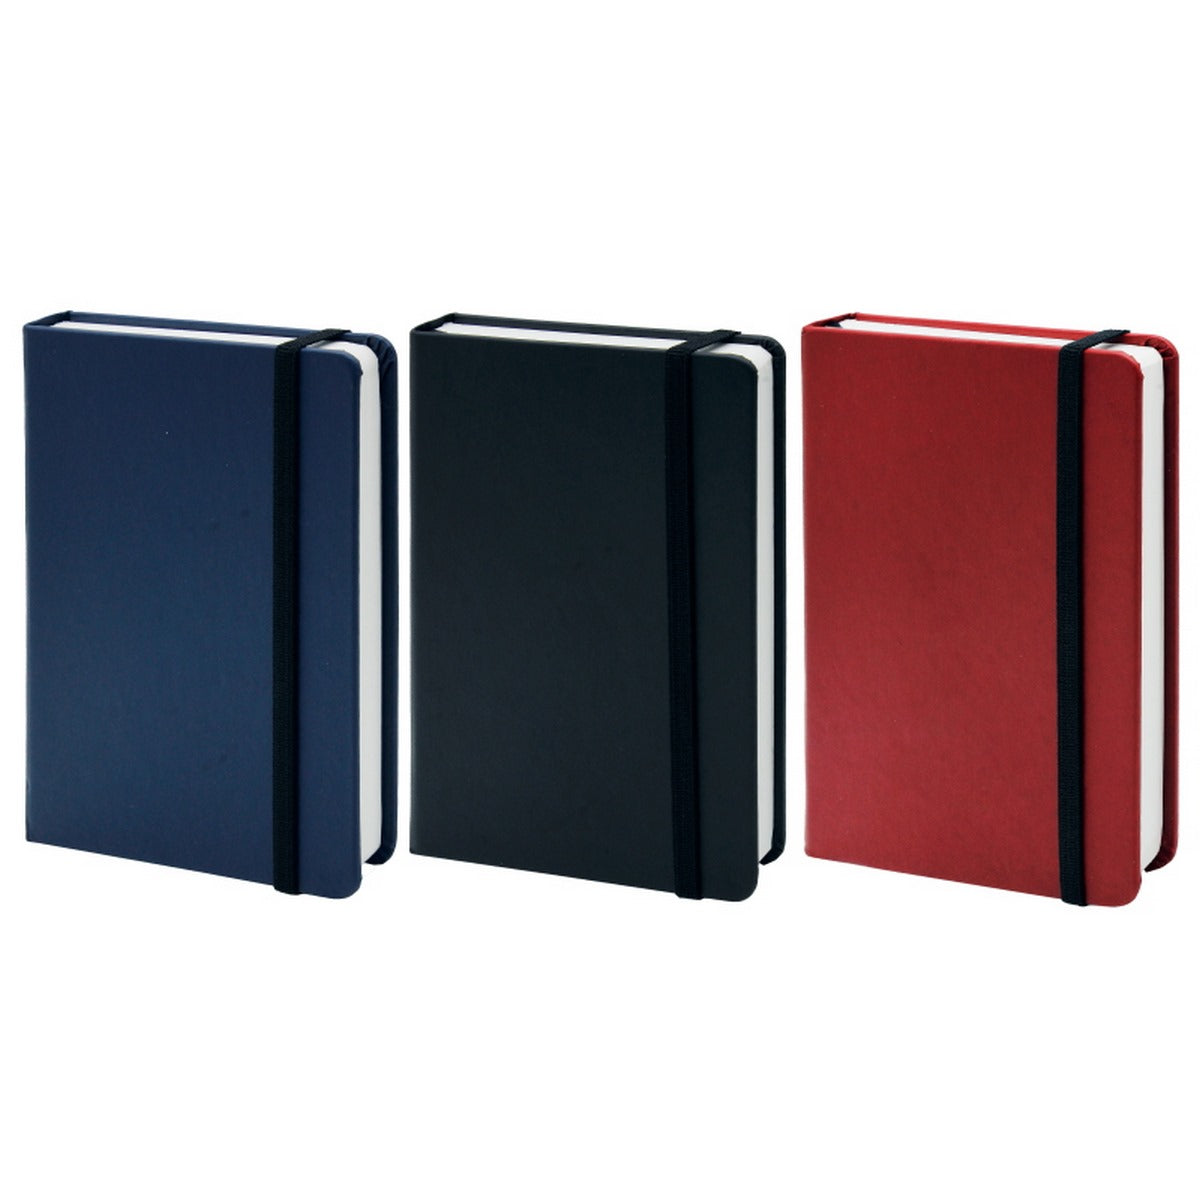 jags-mumbai Formal Diary product product product product Note Book Journal With Elastic Small 160Peg A6NBBP